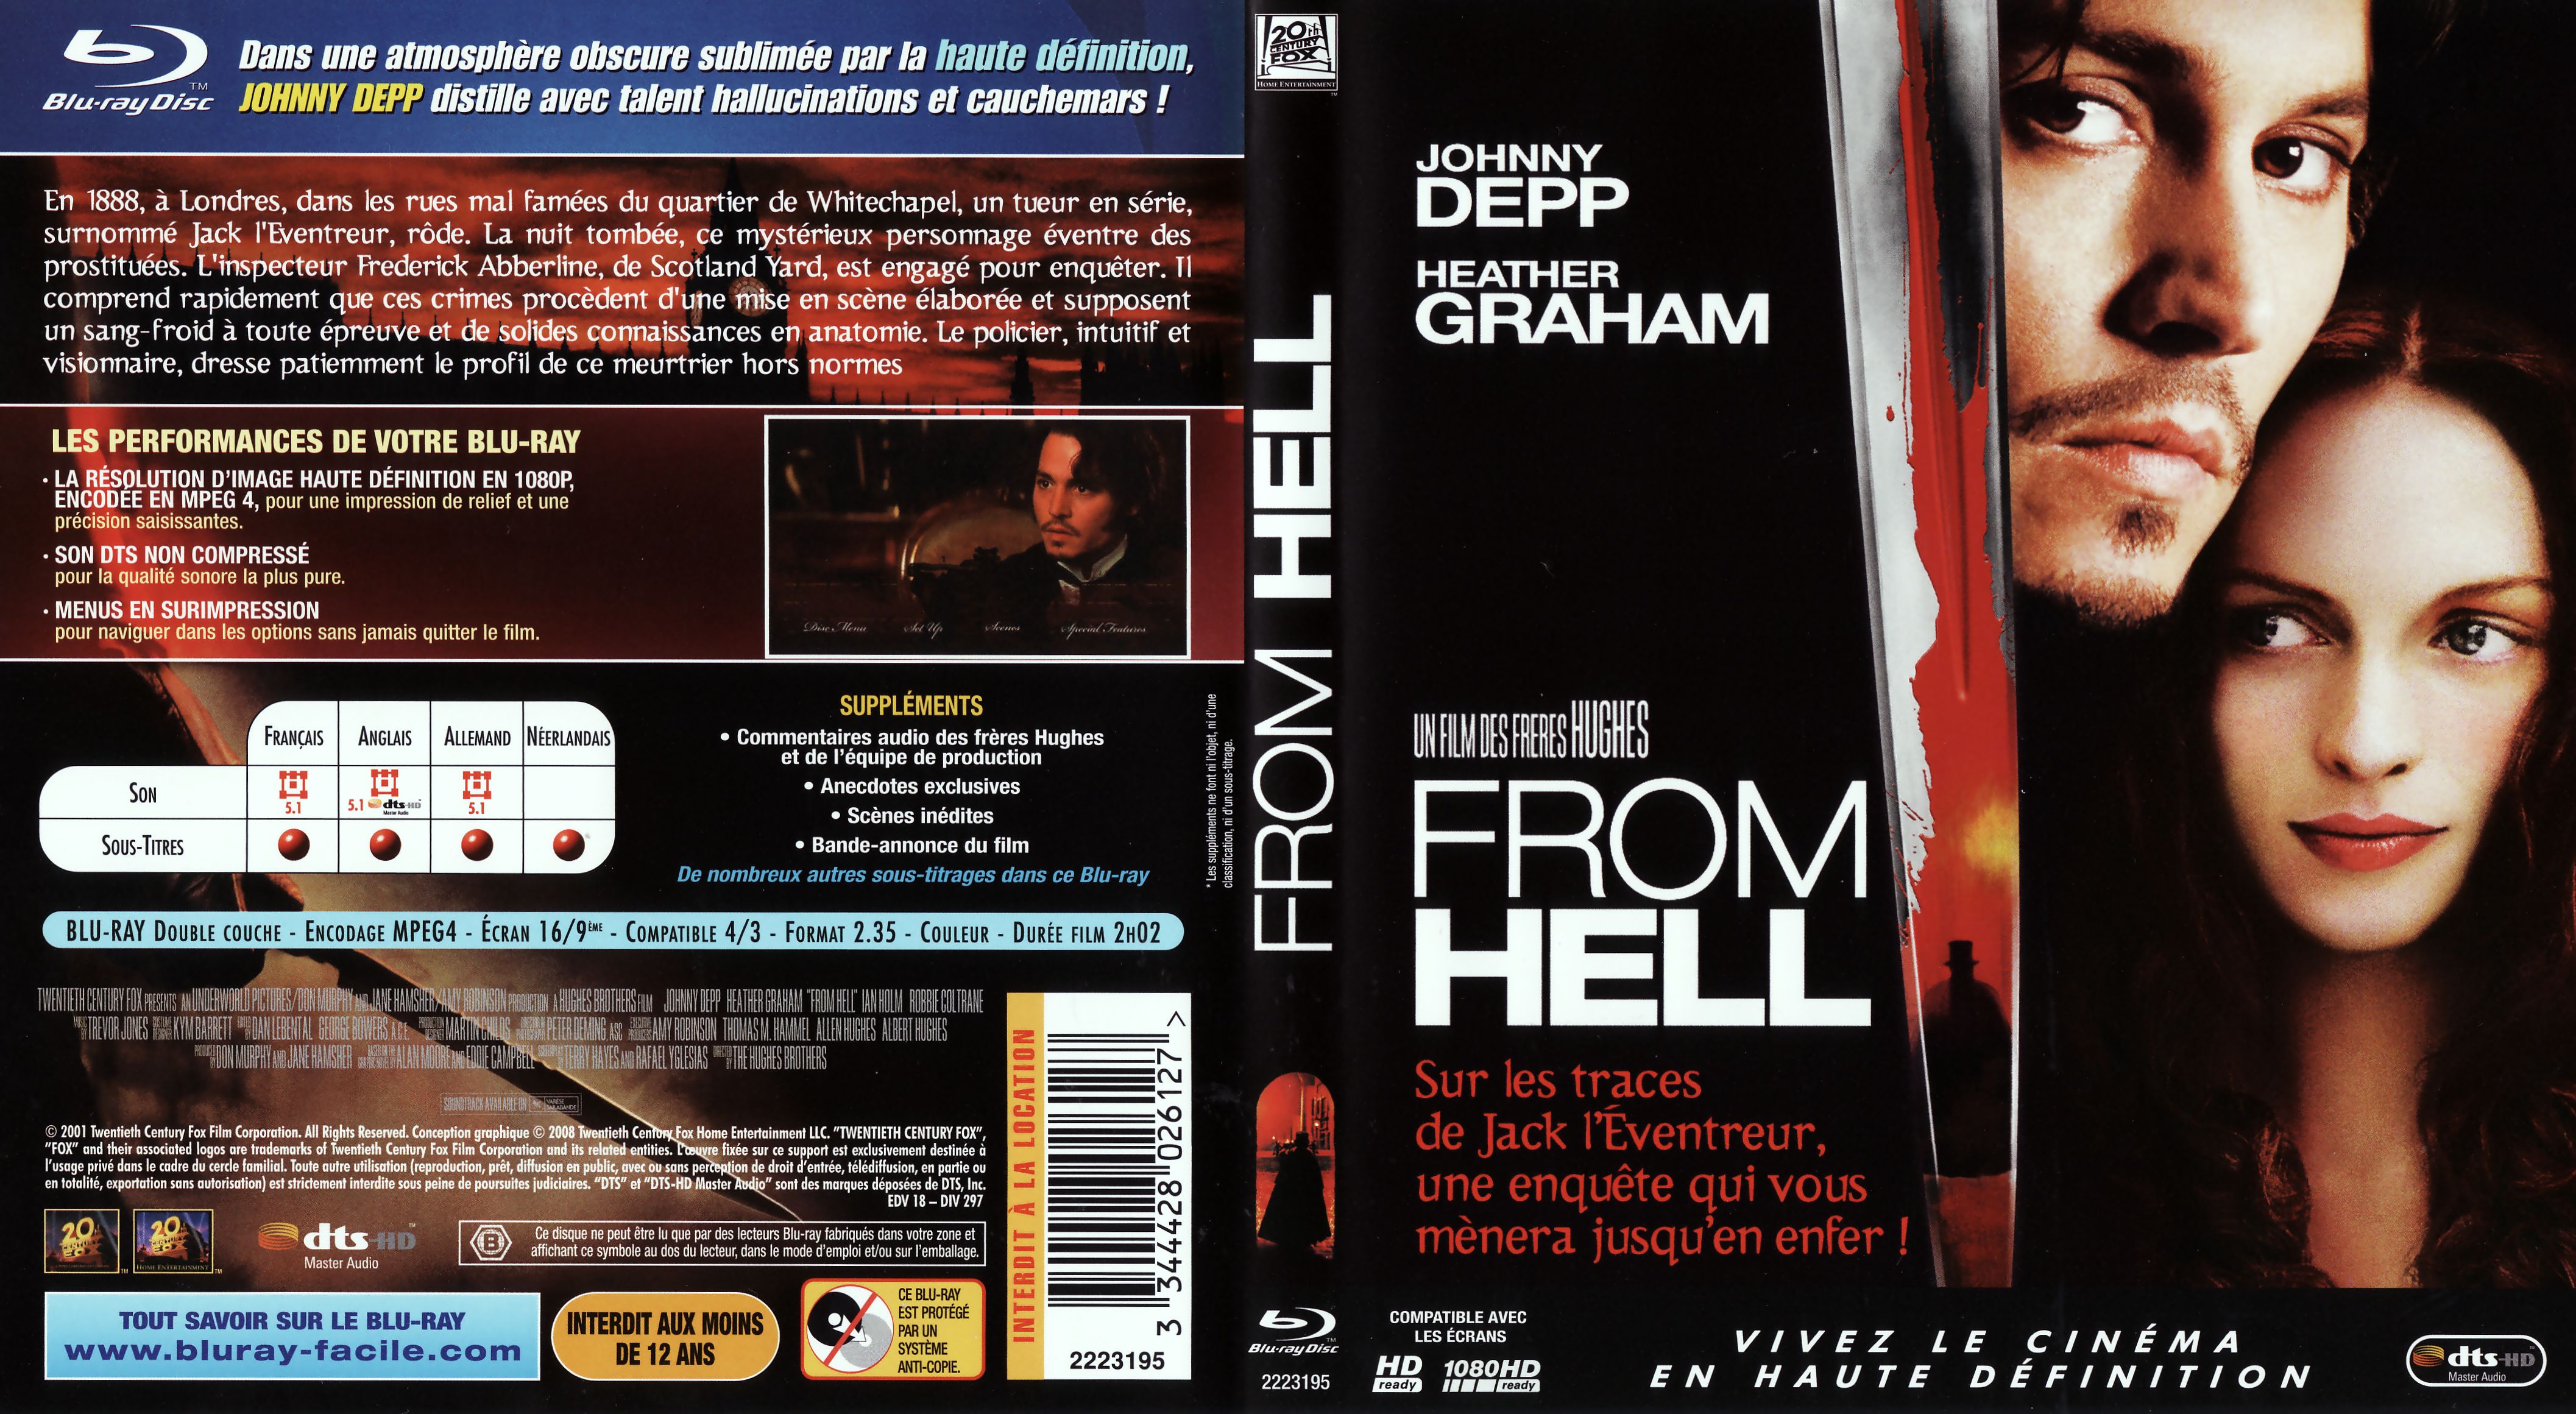 Jaquette DVD From hell (BLU-RAY)